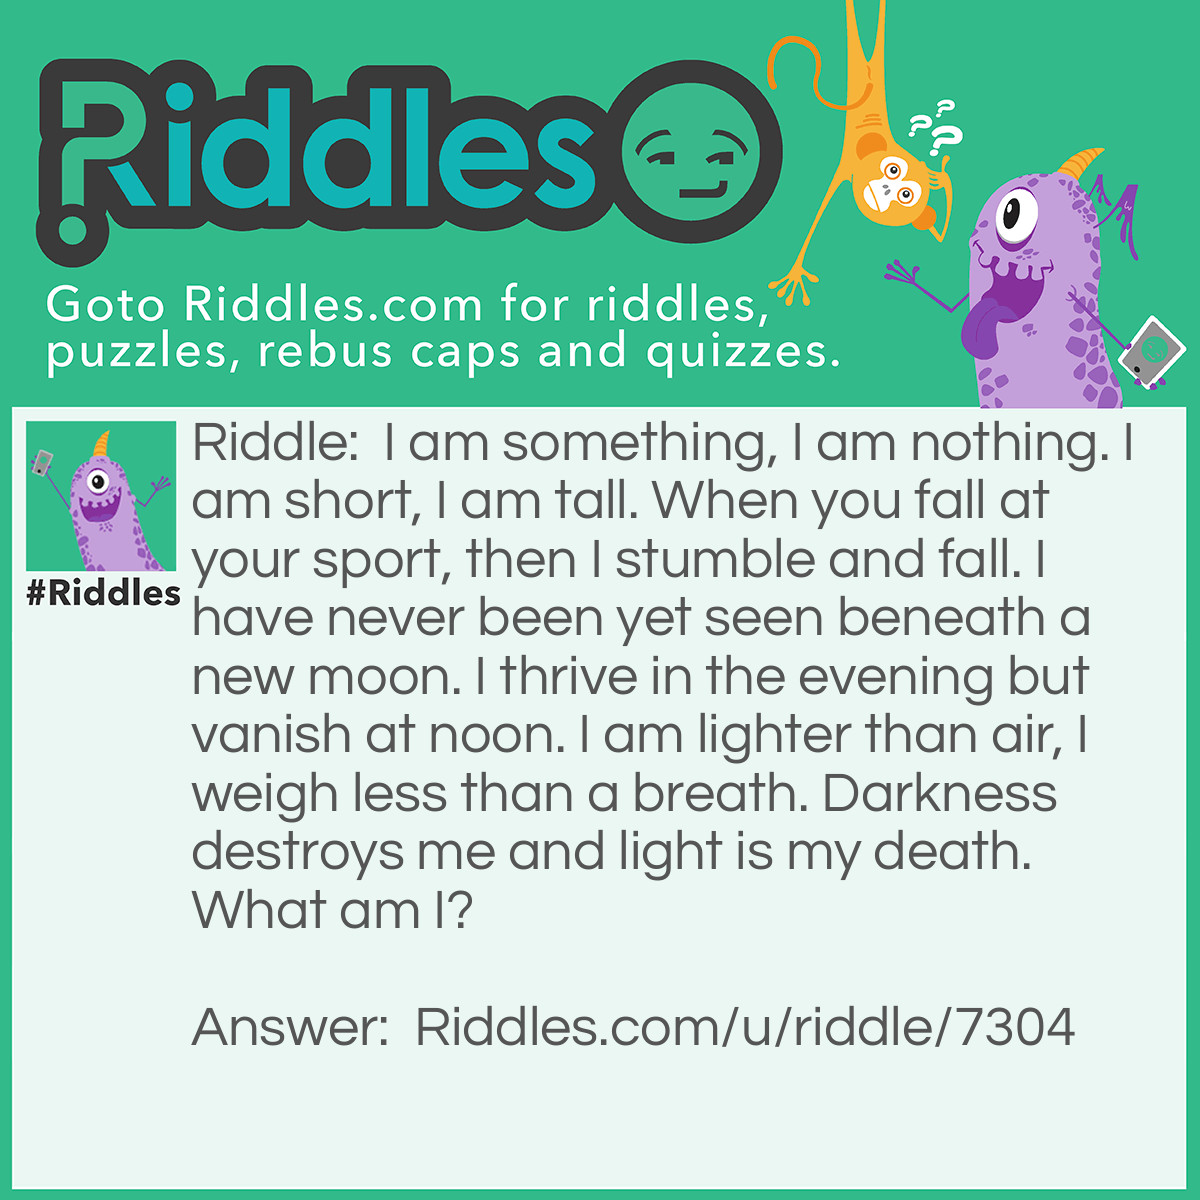 Riddle: I am something, I am nothing. I am short, I am tall. When you fall at your sport, then I stumble and fall. I have never been yet seen beneath a new moon. I thrive in the evening but vanish at noon. I am lighter than air, I weigh less than a breath. Darkness destroys me and light is my death. What am I? Answer: A shadow.